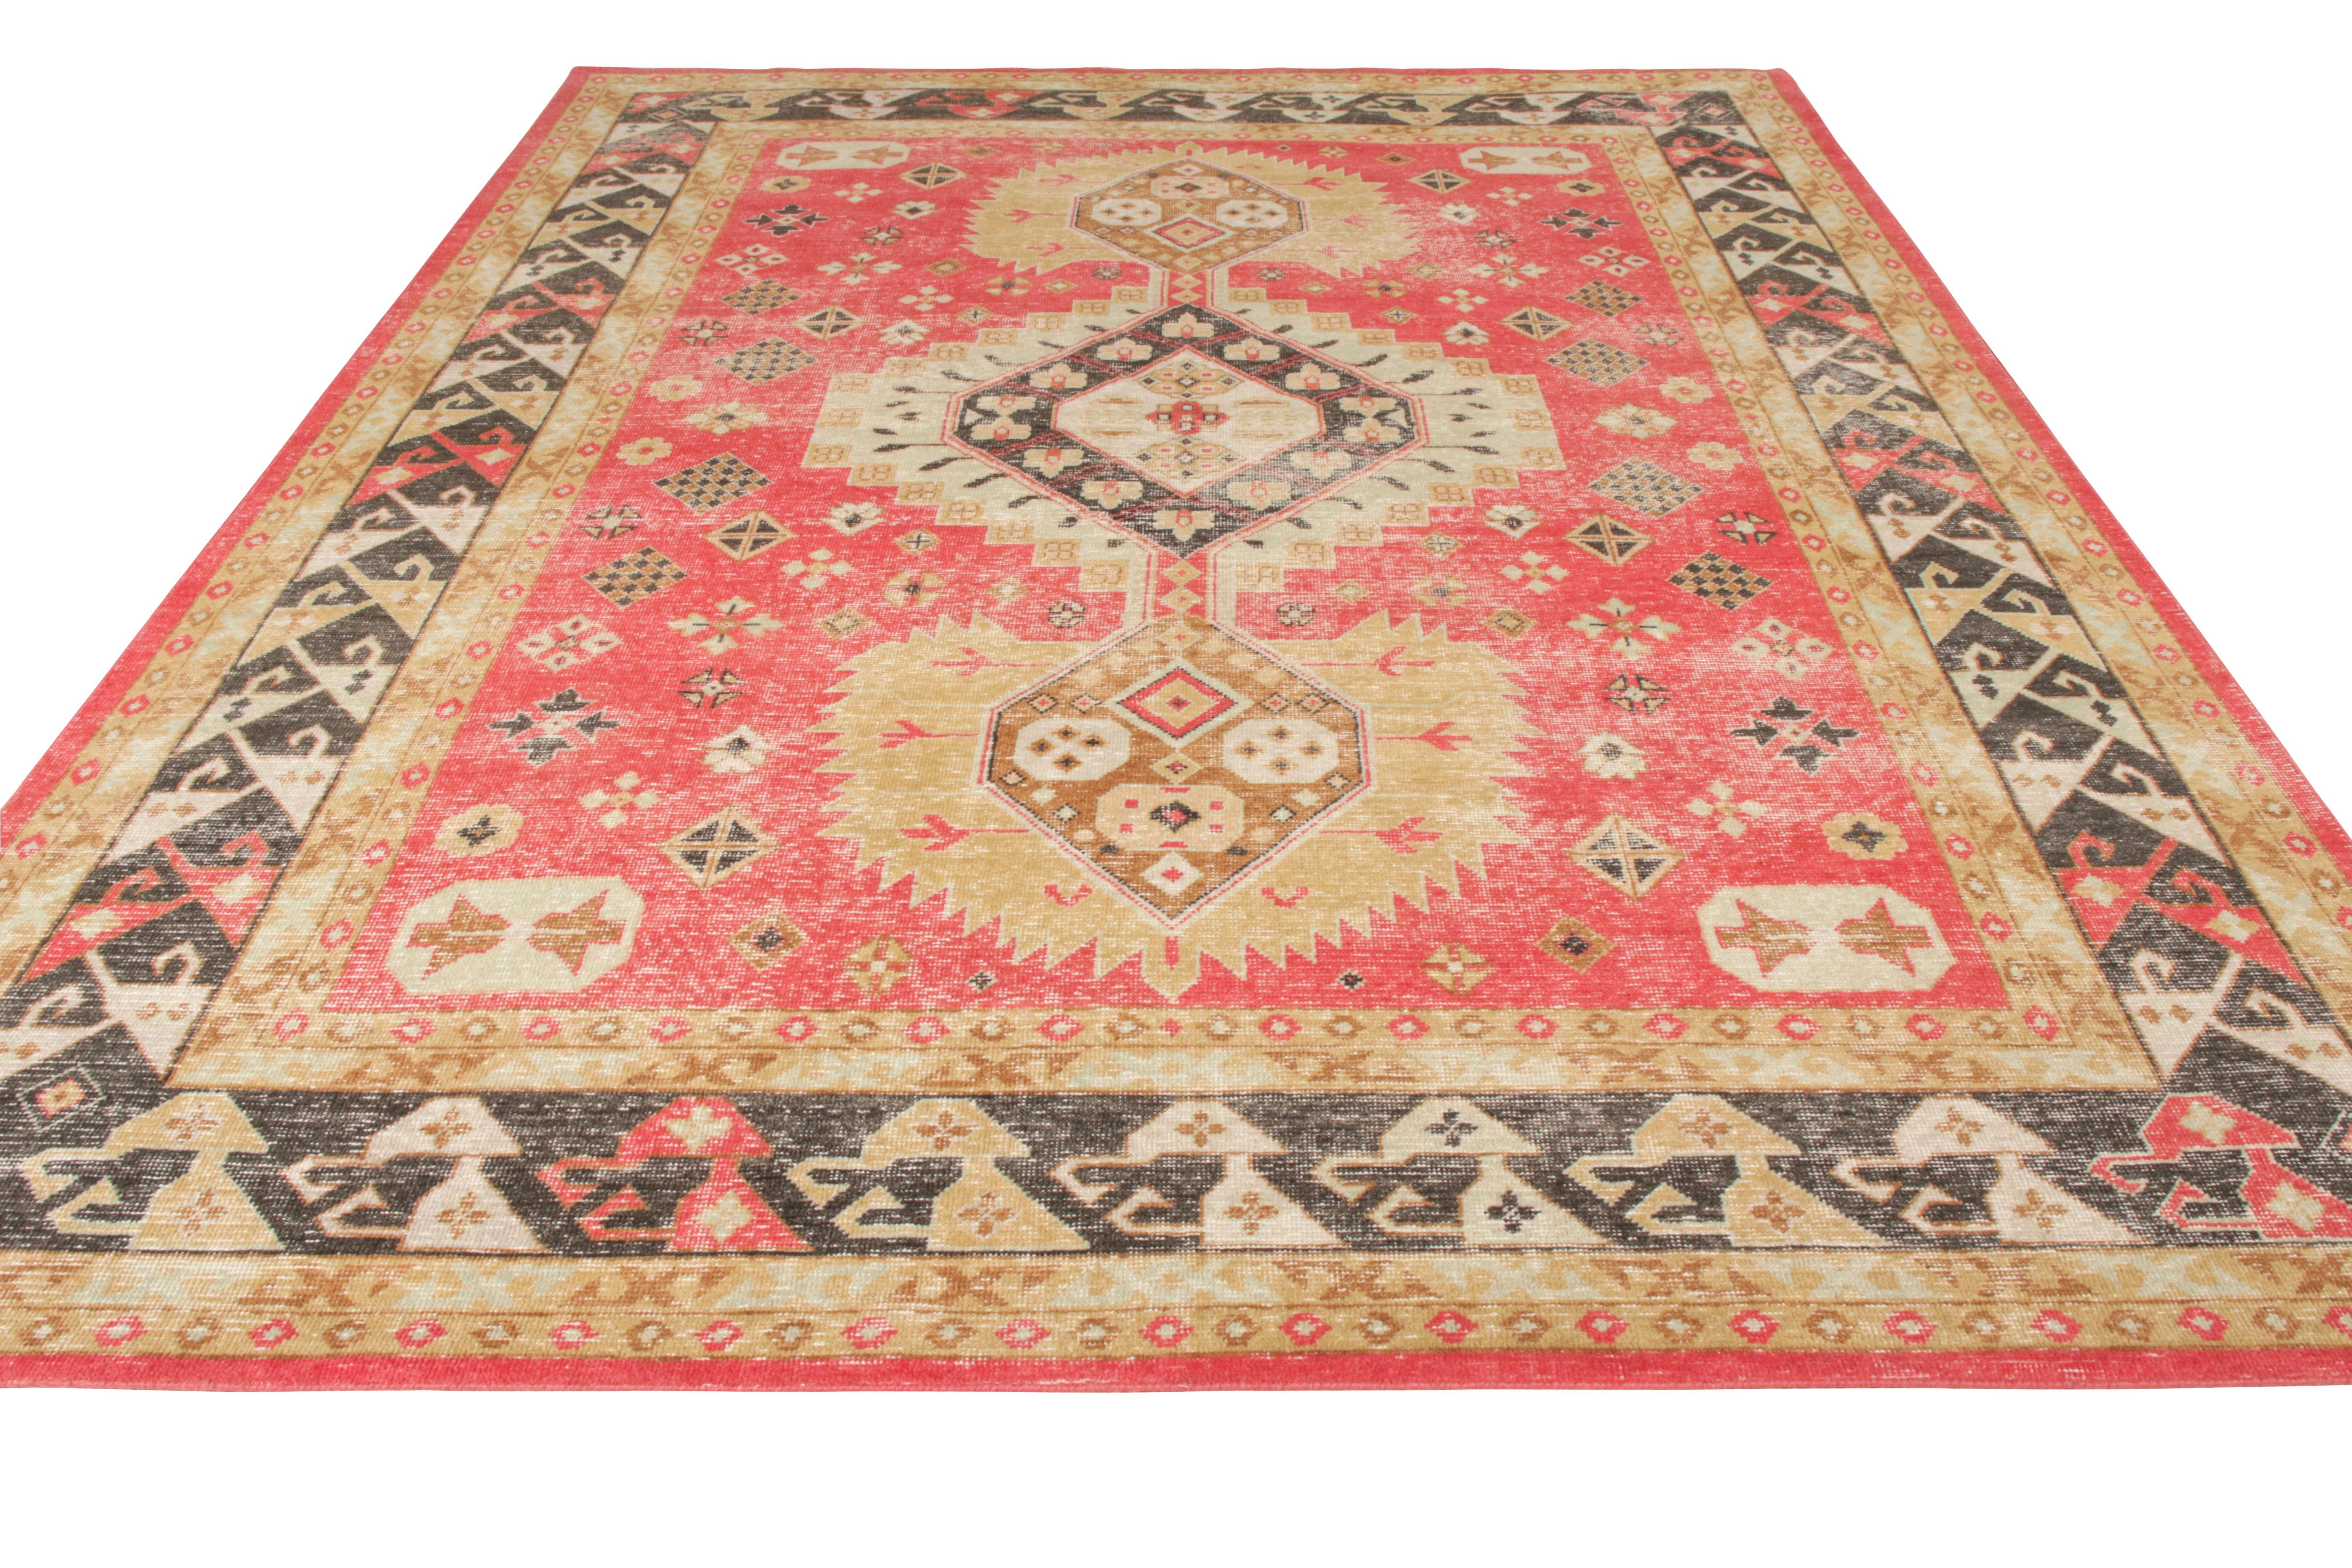 A 9 x 11 distressed style rug joining Rug & Kilim’s Homage collection. Hand knotted in wool, the rug portrays a new language of design where the field is elaborated by a standalone design sitting majestically in striking hues of red, beige-brown,